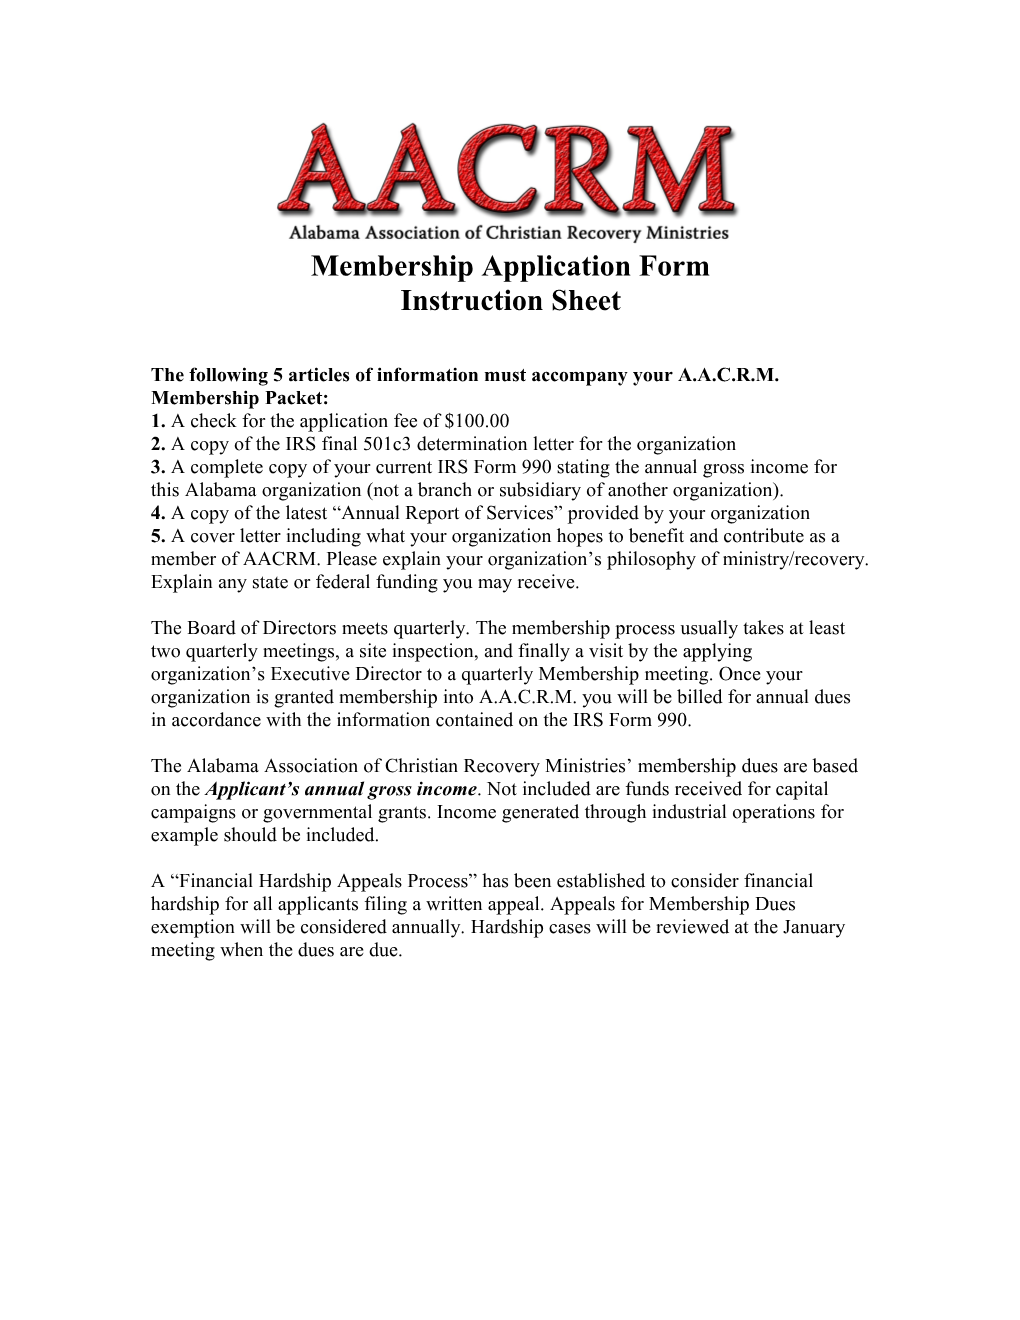 The Following 5 Articles of Information Must Accompany Your A.A.C.R.M.Membership Packet